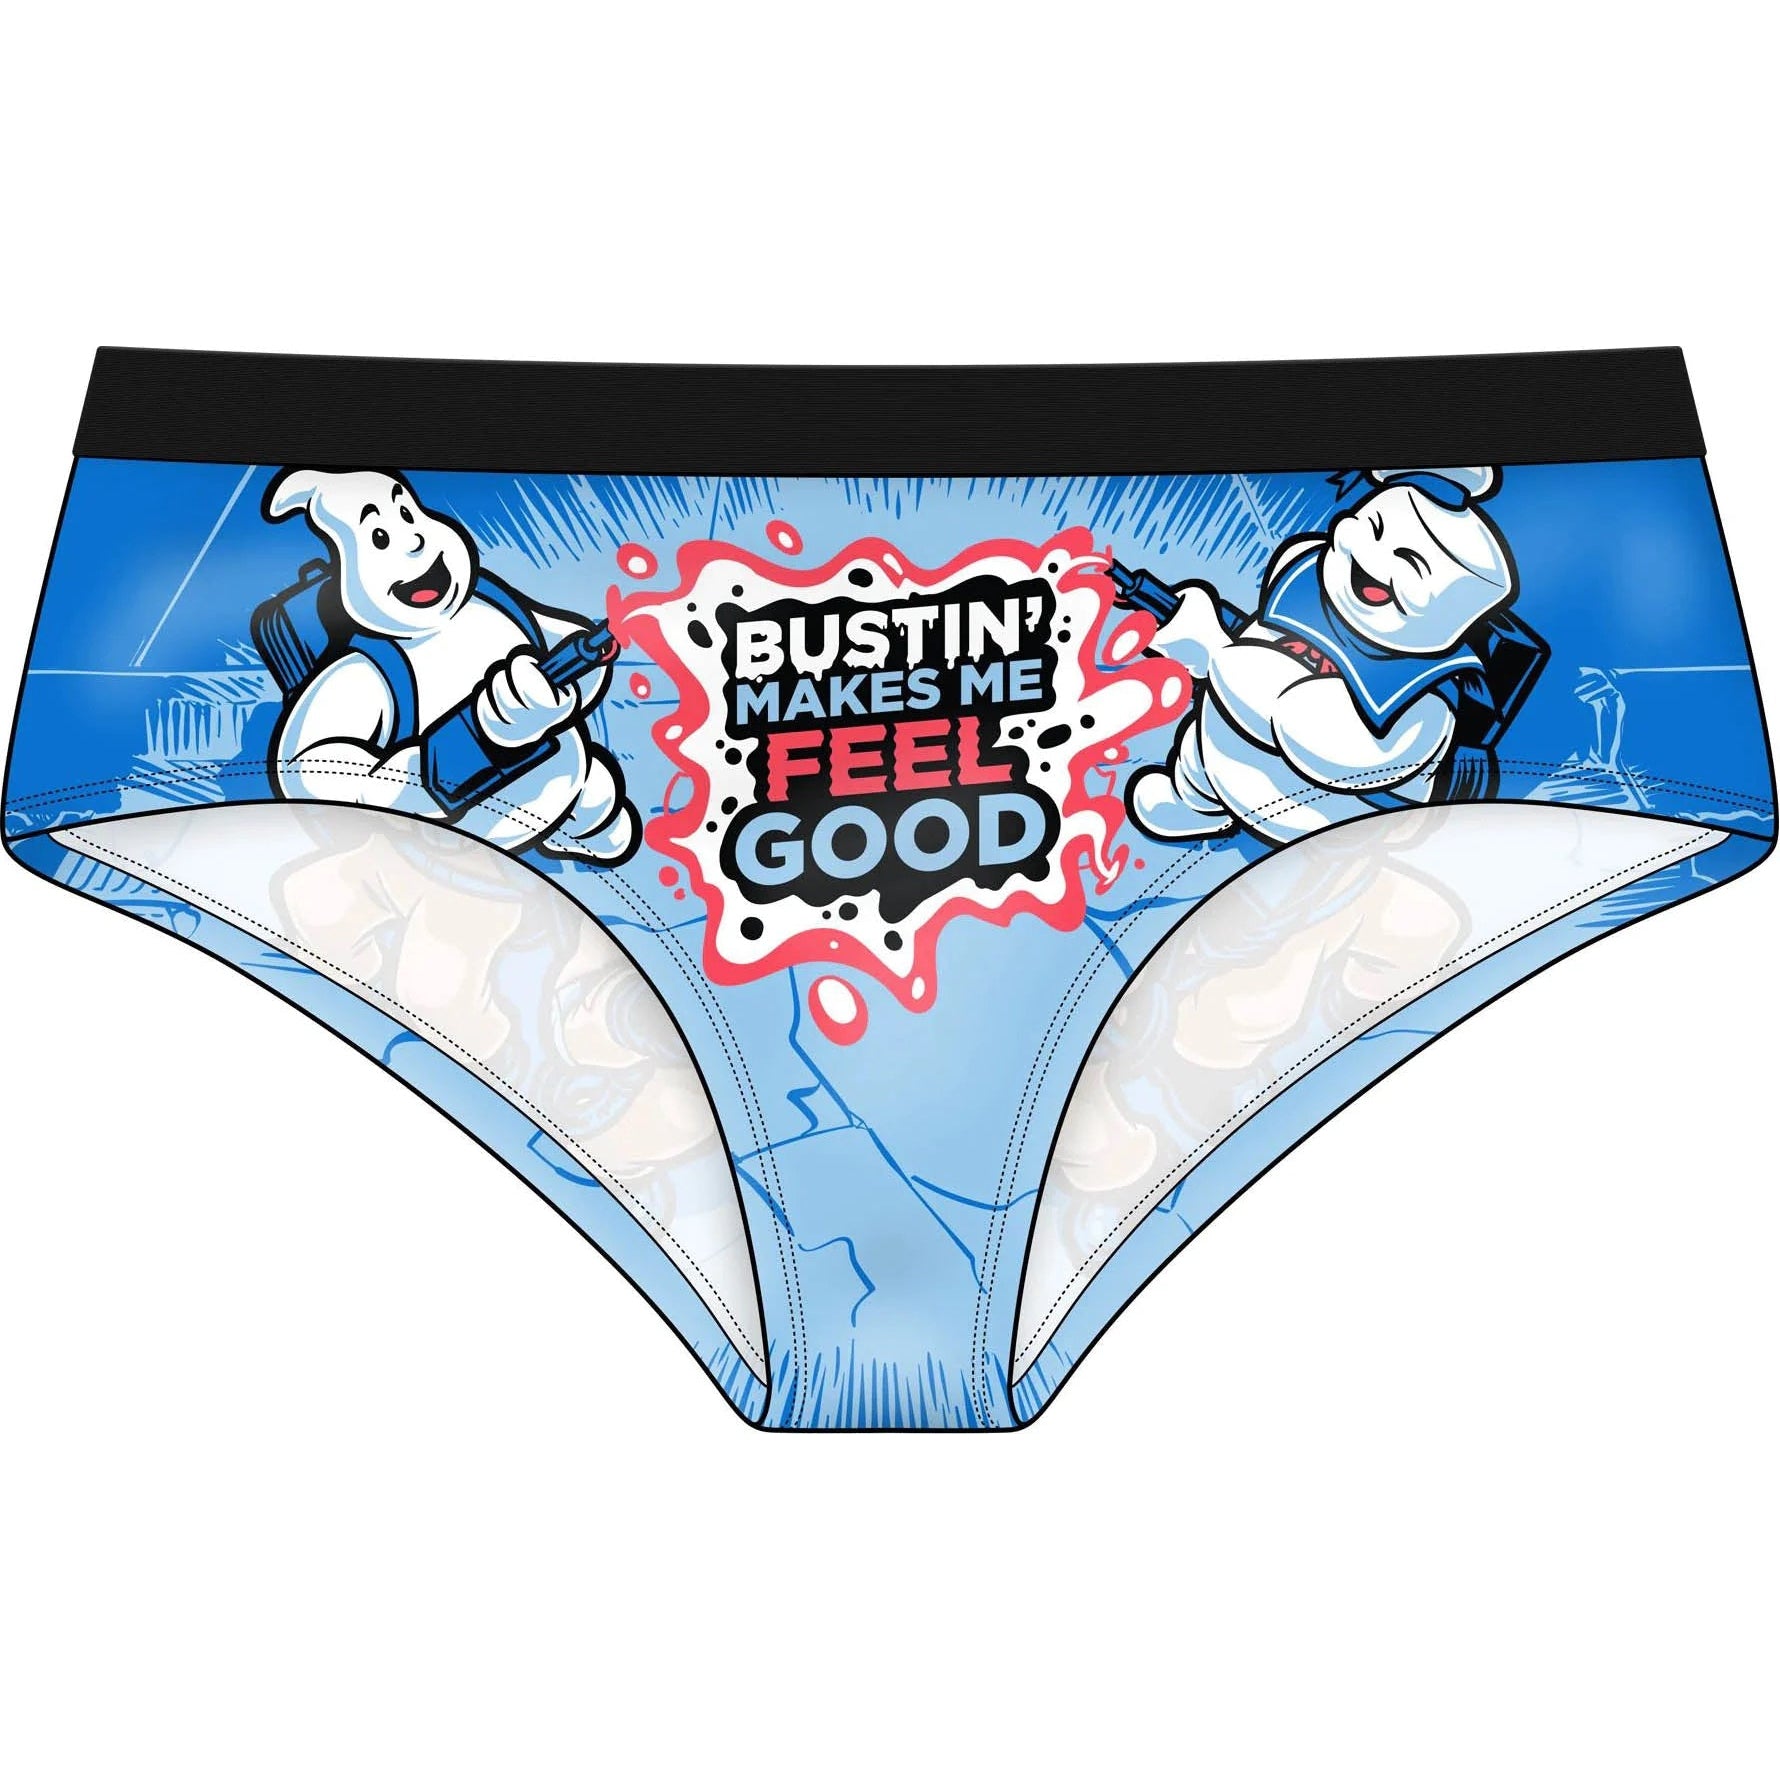 Ask Me About My Dog Panties, Ask Me About My Dog Underwear, Briefs, Cotton  Briefs, Funny Underwear, Panties for Women -  Sweden